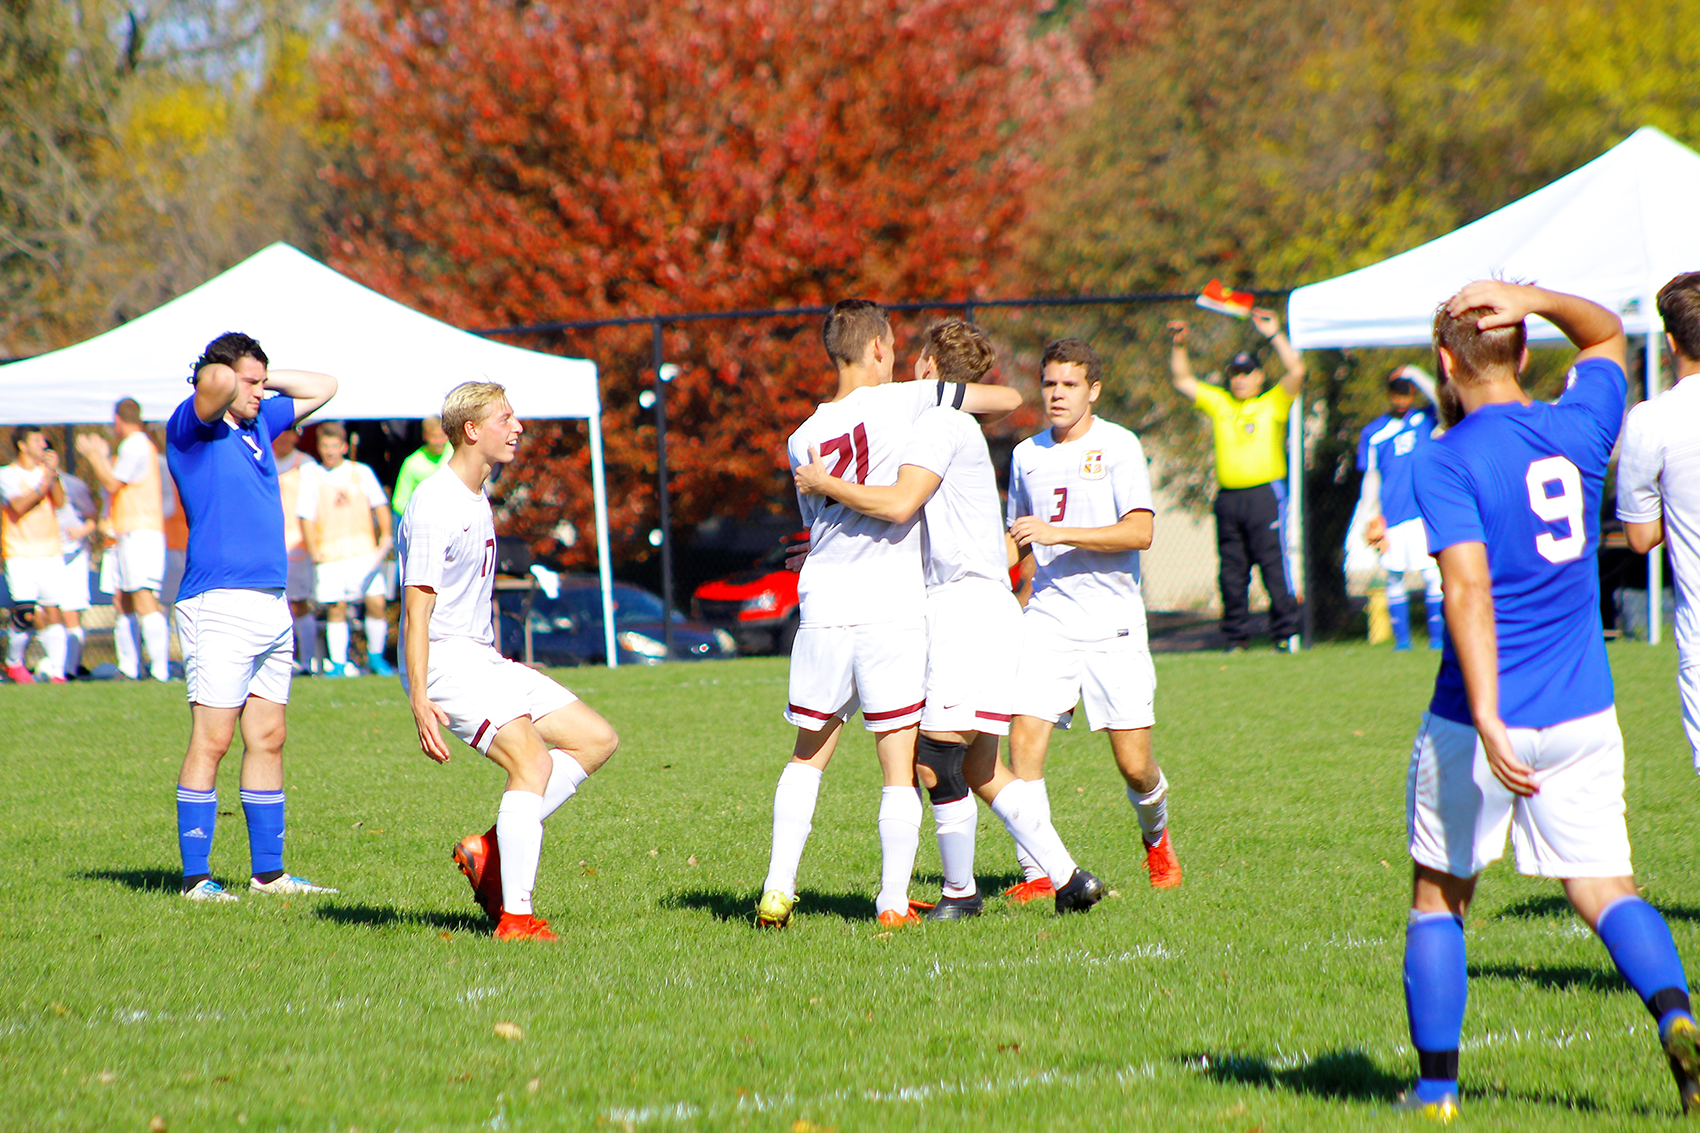 Eagles players congratulate Isaac Mosher after his goal gave Faith a 1-0 lead.